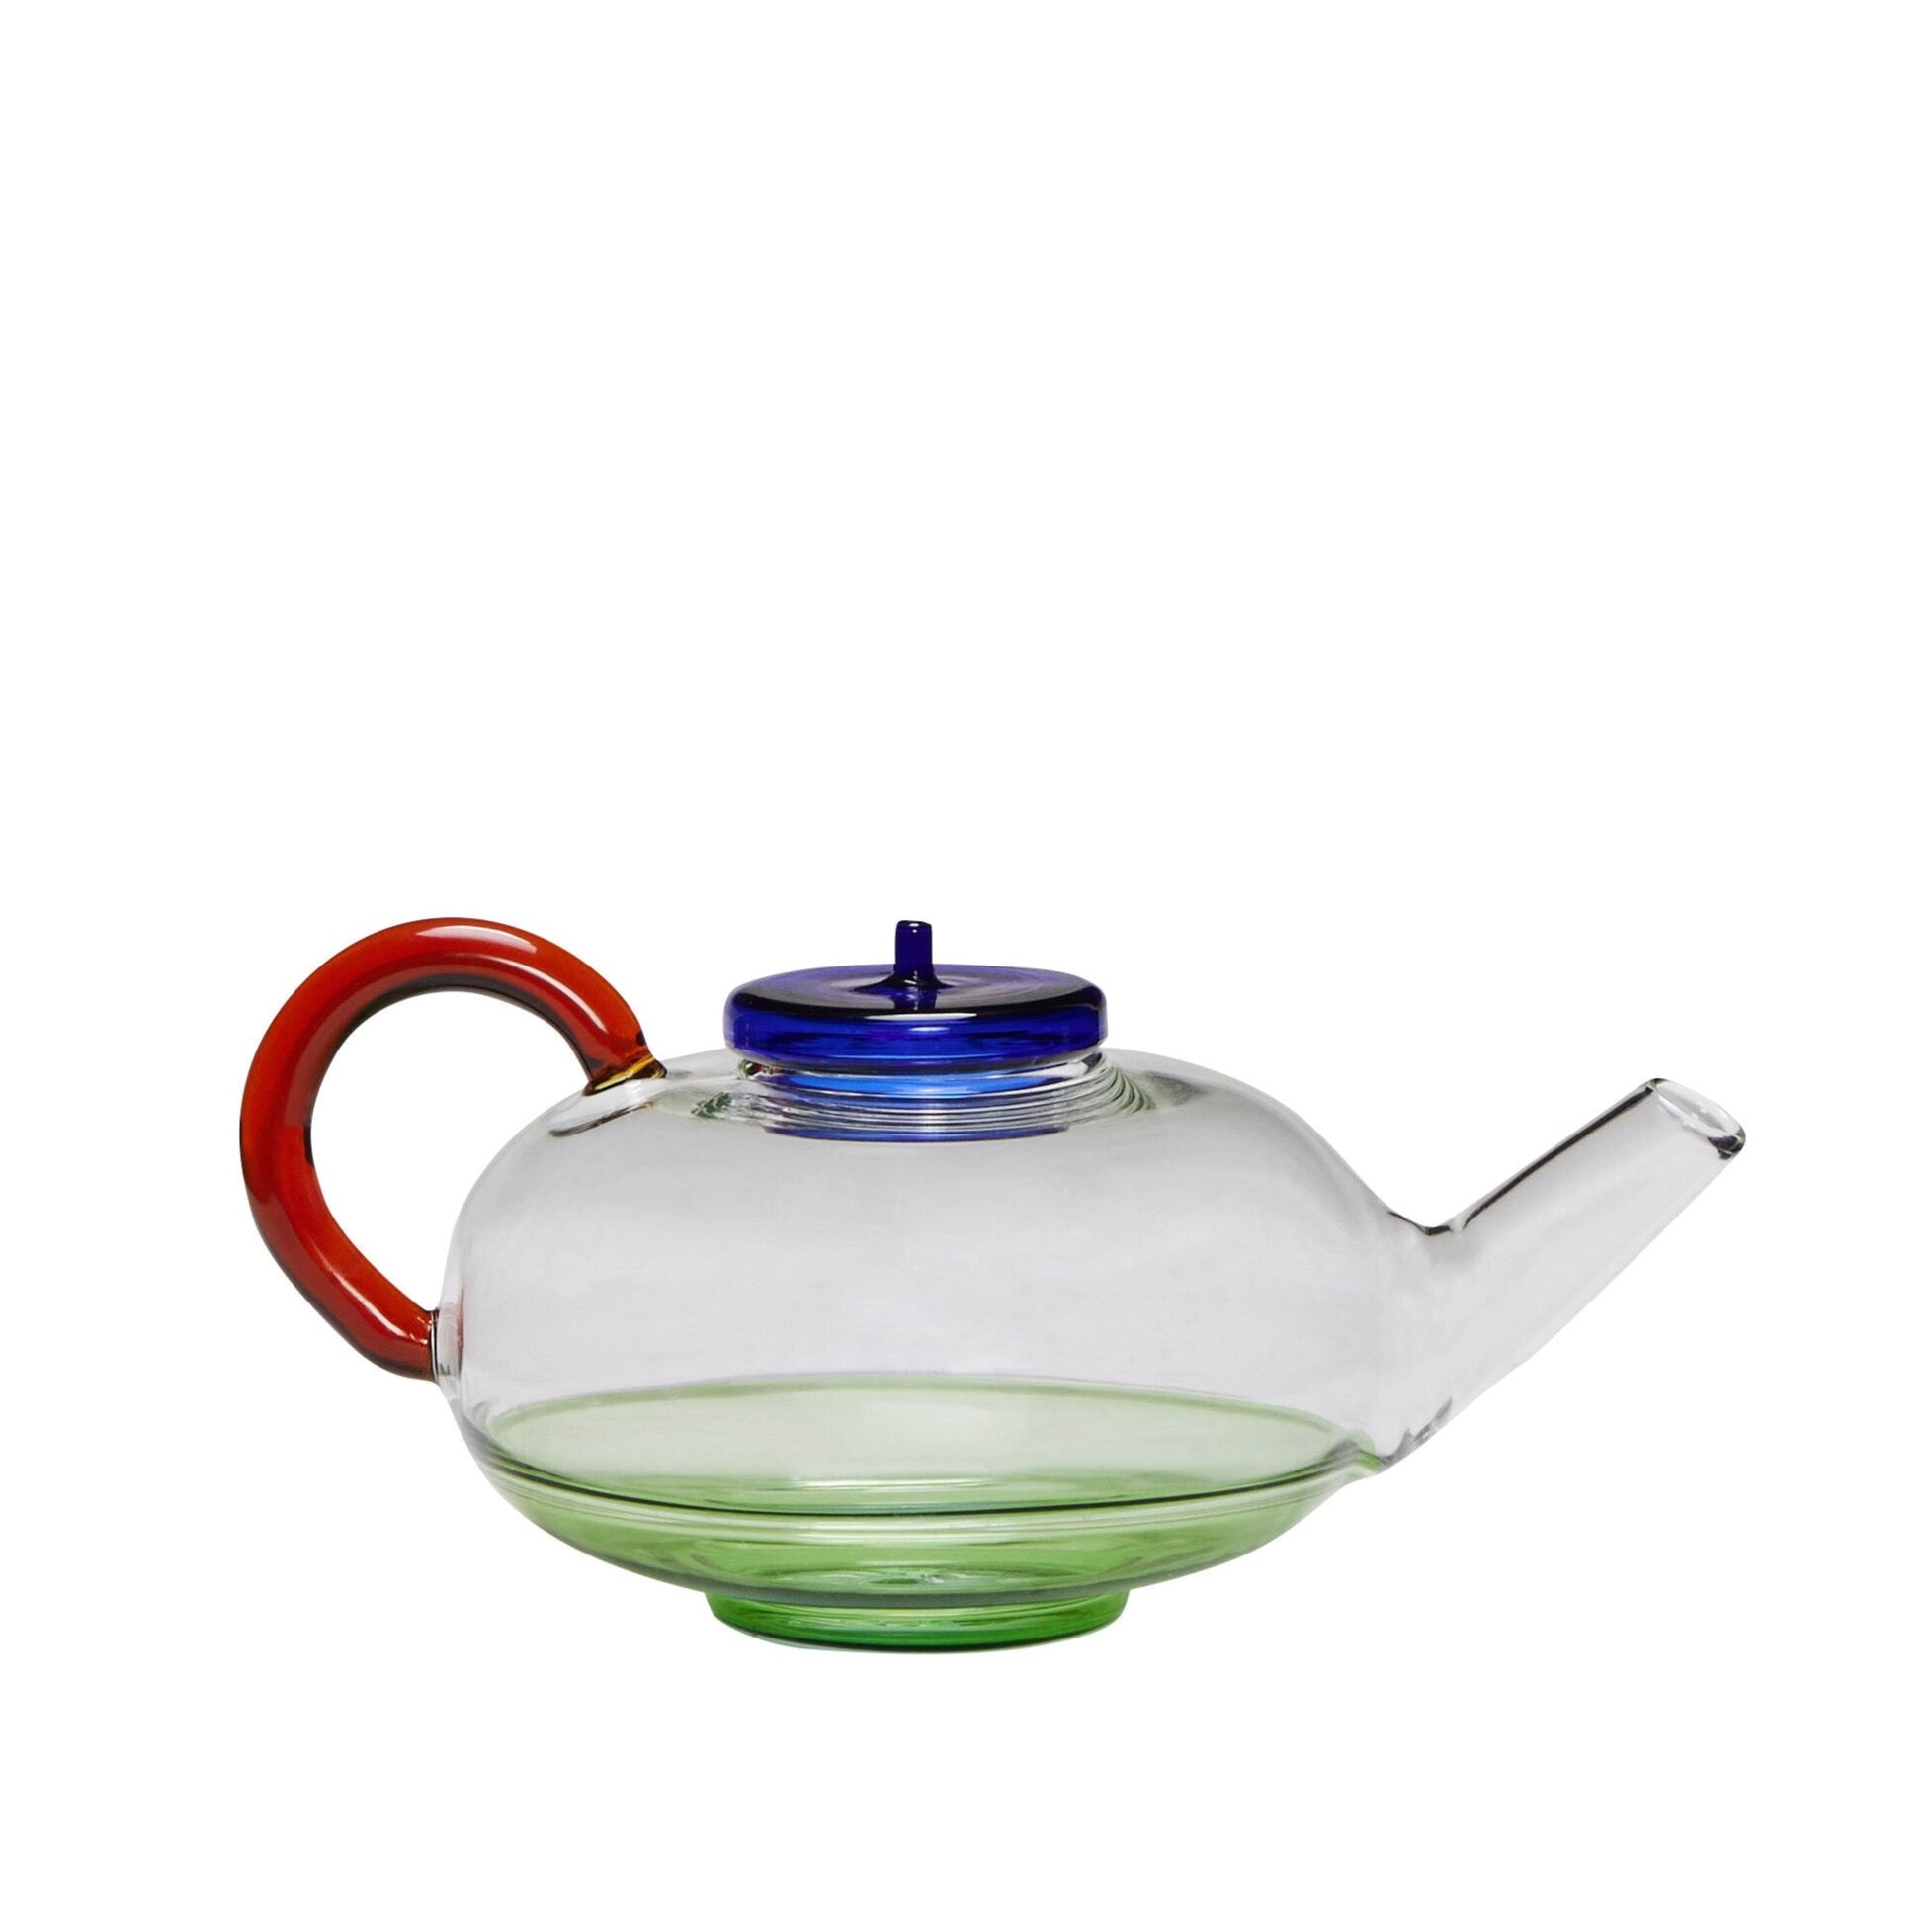 NoRush Teapot in Blue, Clear, and Green